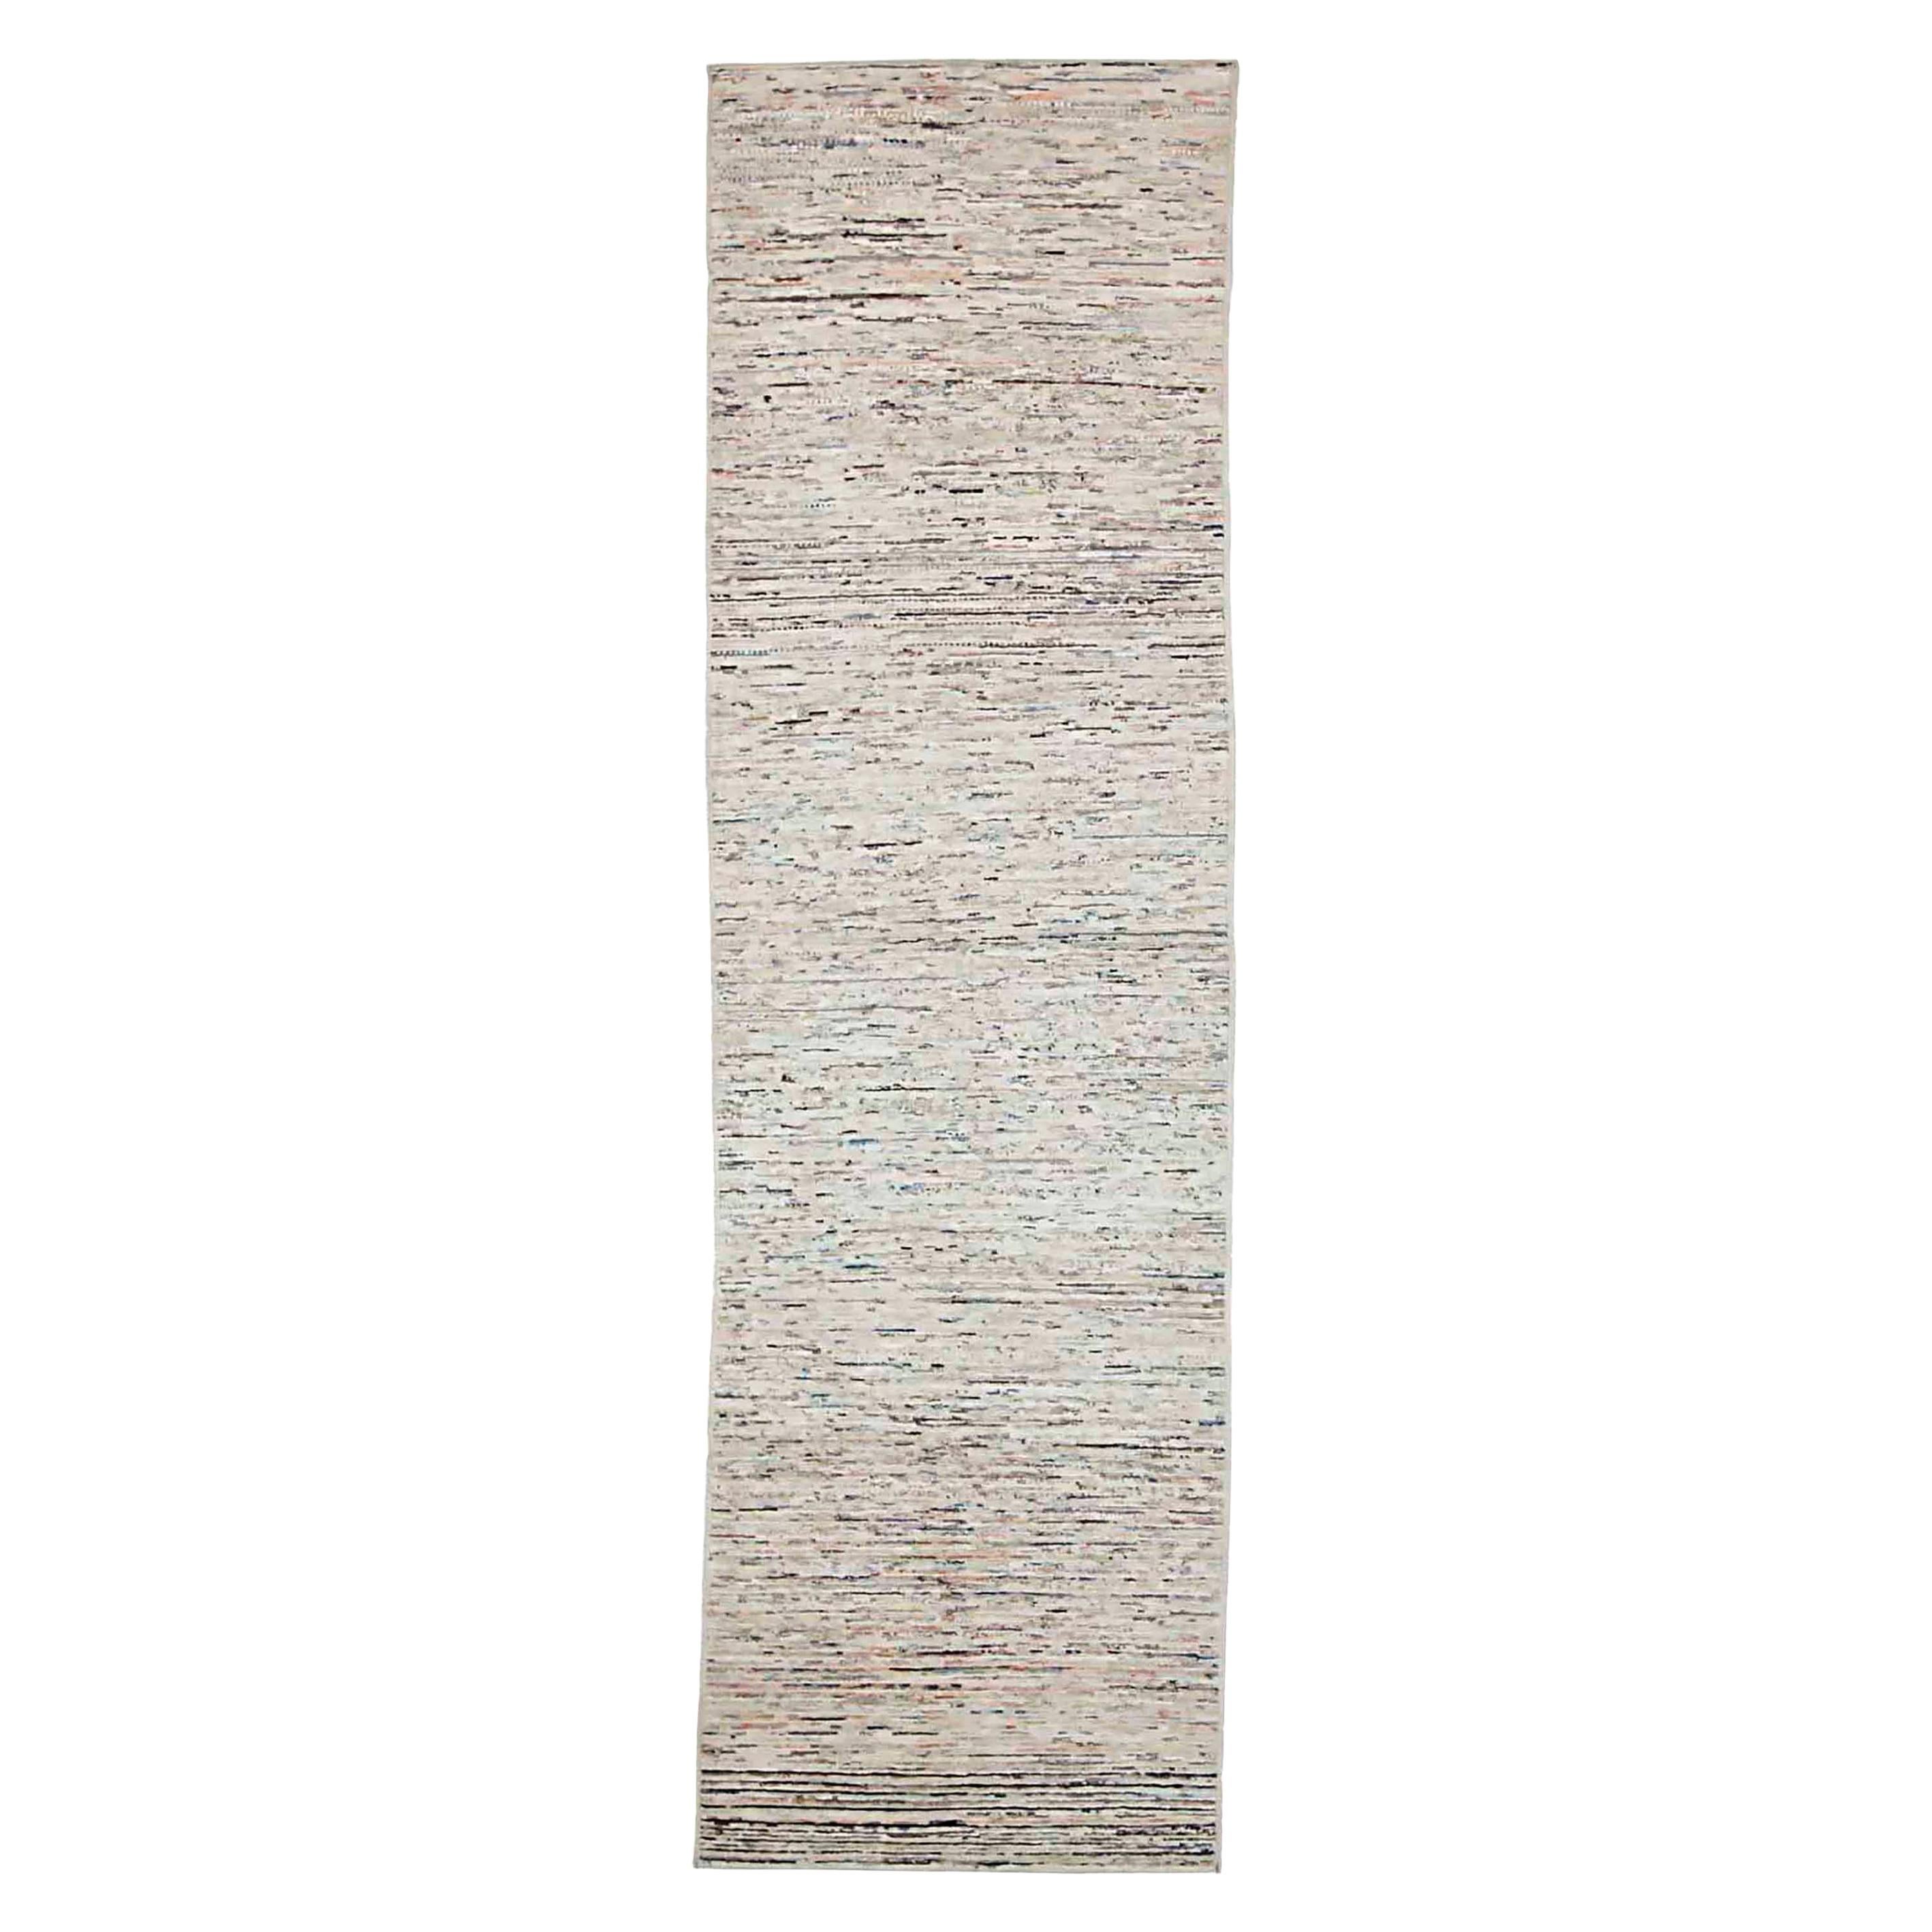 Afghan Moroccan Style Runner Rug with Ivory Field and Colored Streaks